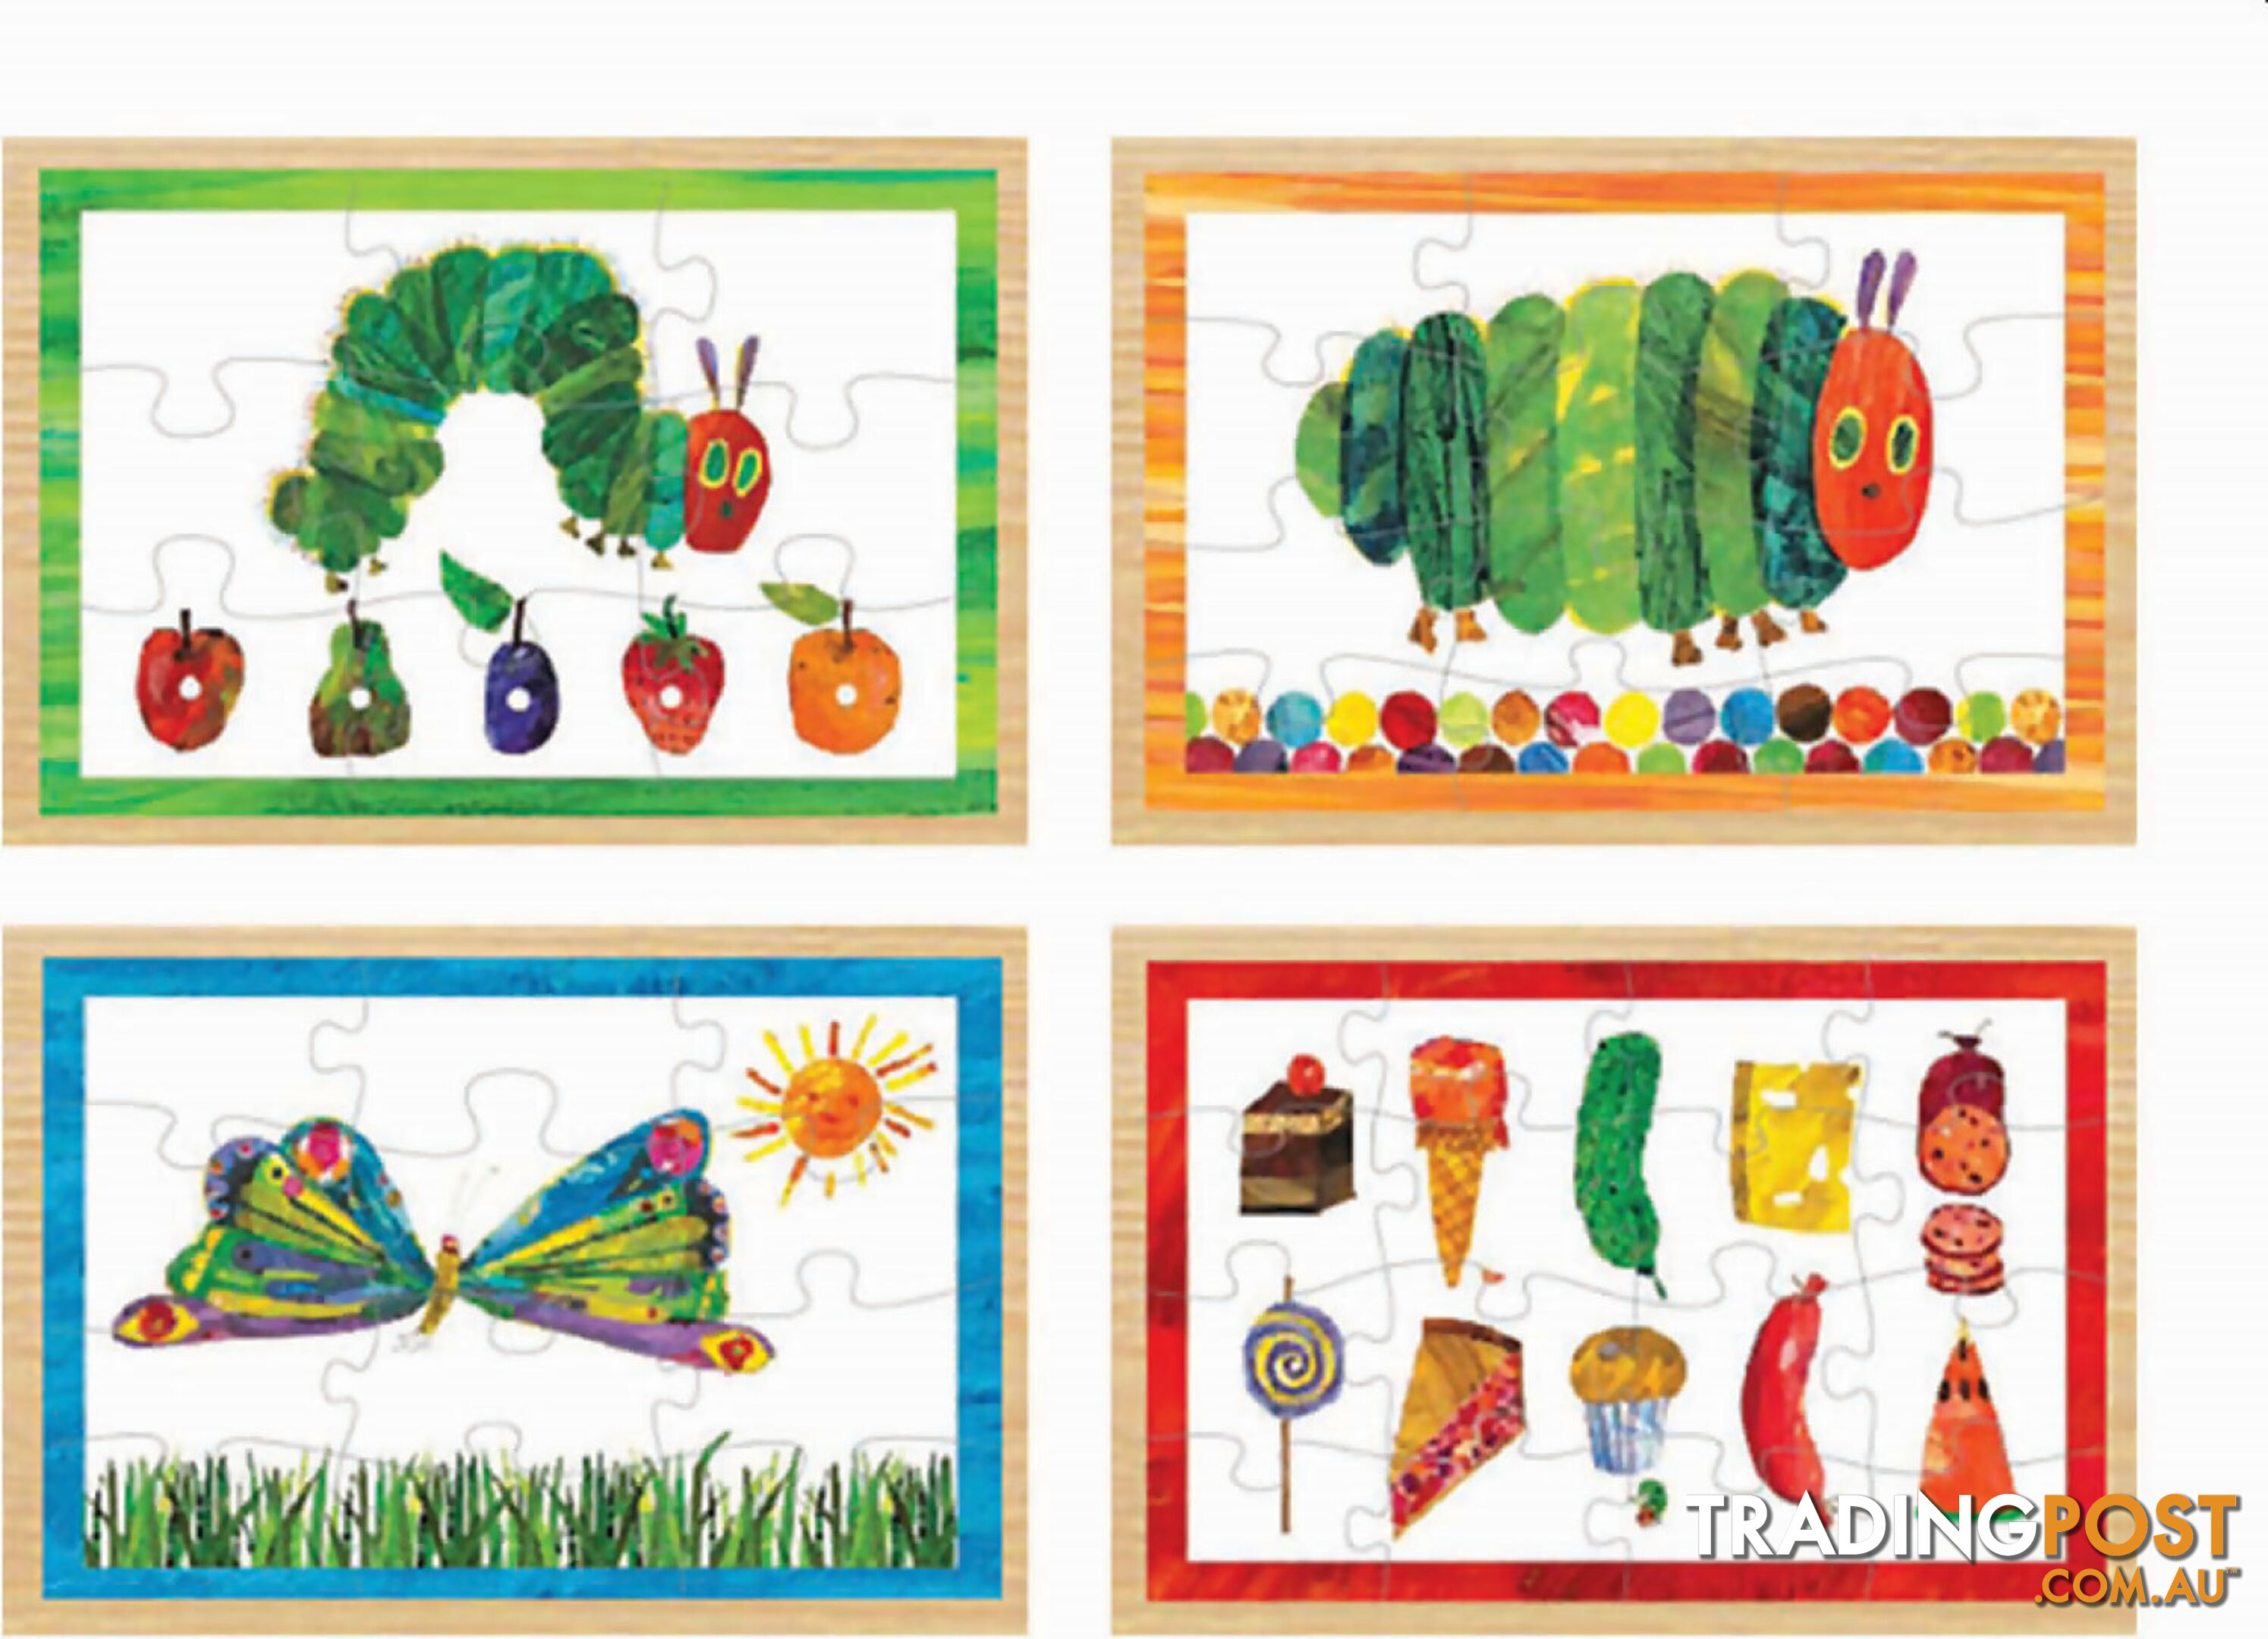 The Very Hungry Caterpillar 4 In 1 Wooden Jigsaw Puzzles - The World Of Eric Carle - Jduni30138 - 023332301386